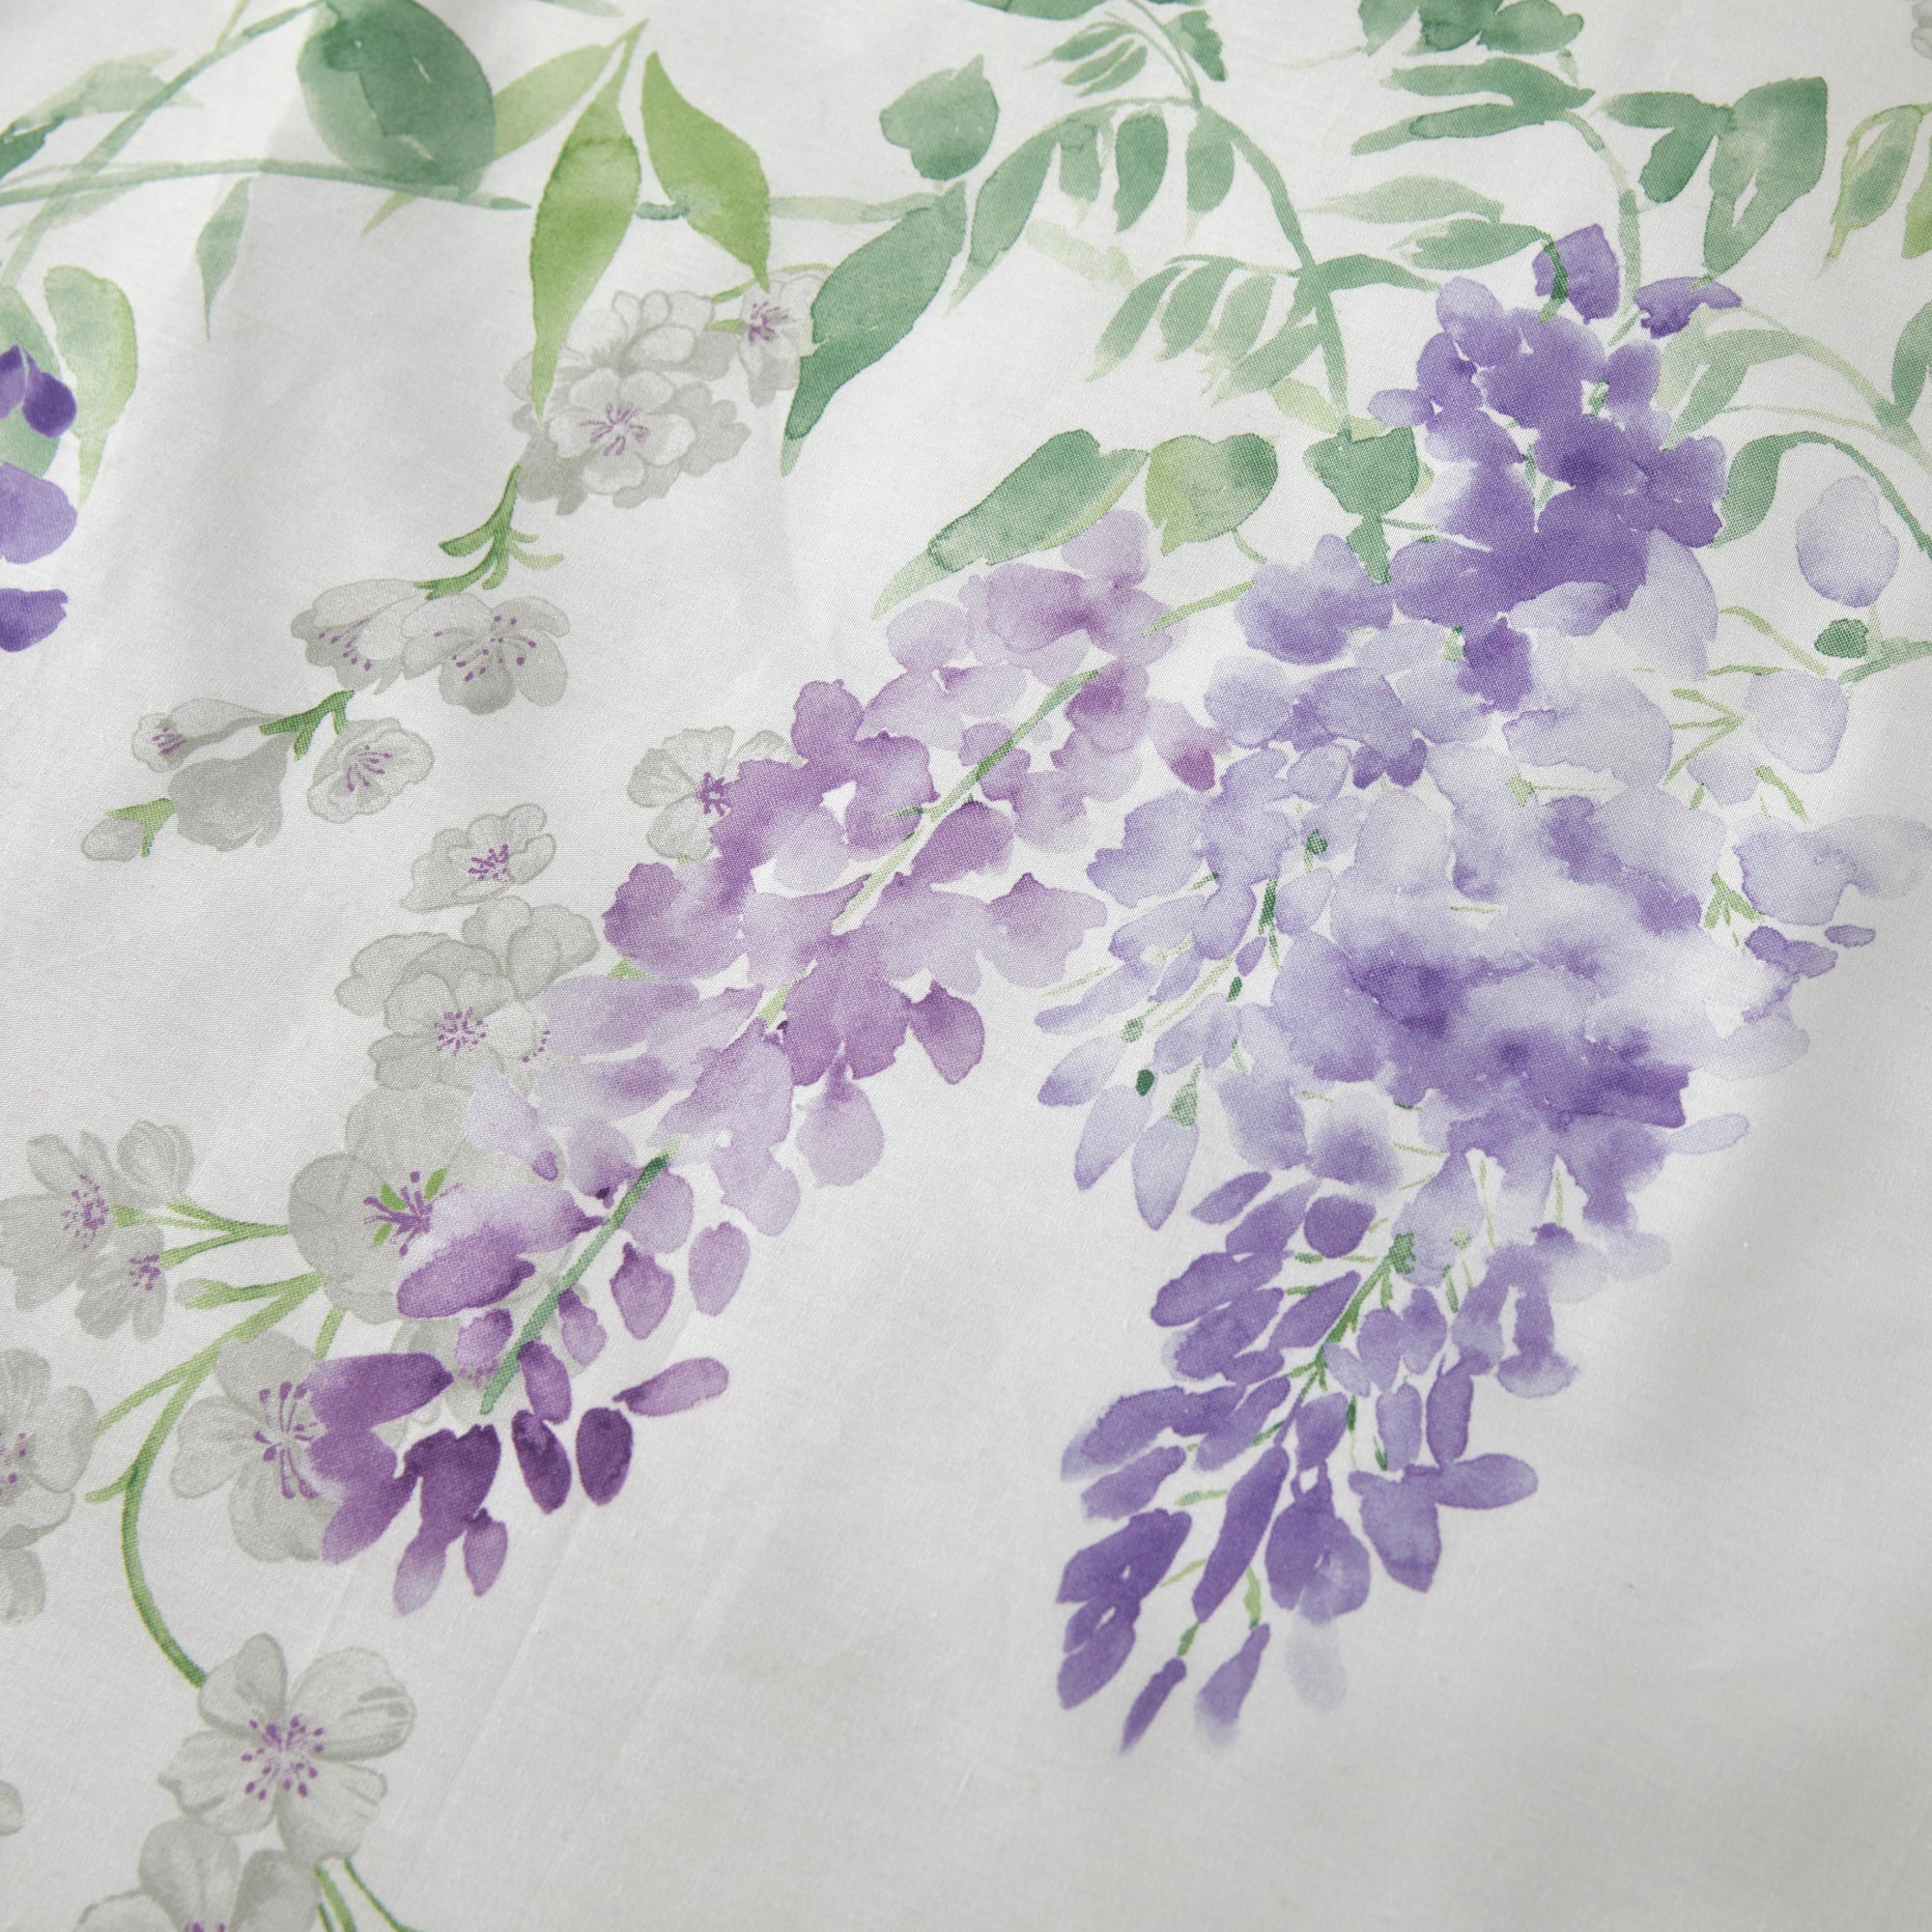 Duvet Cover Set Wisteria by Dreams & Drapes Design in Lilac